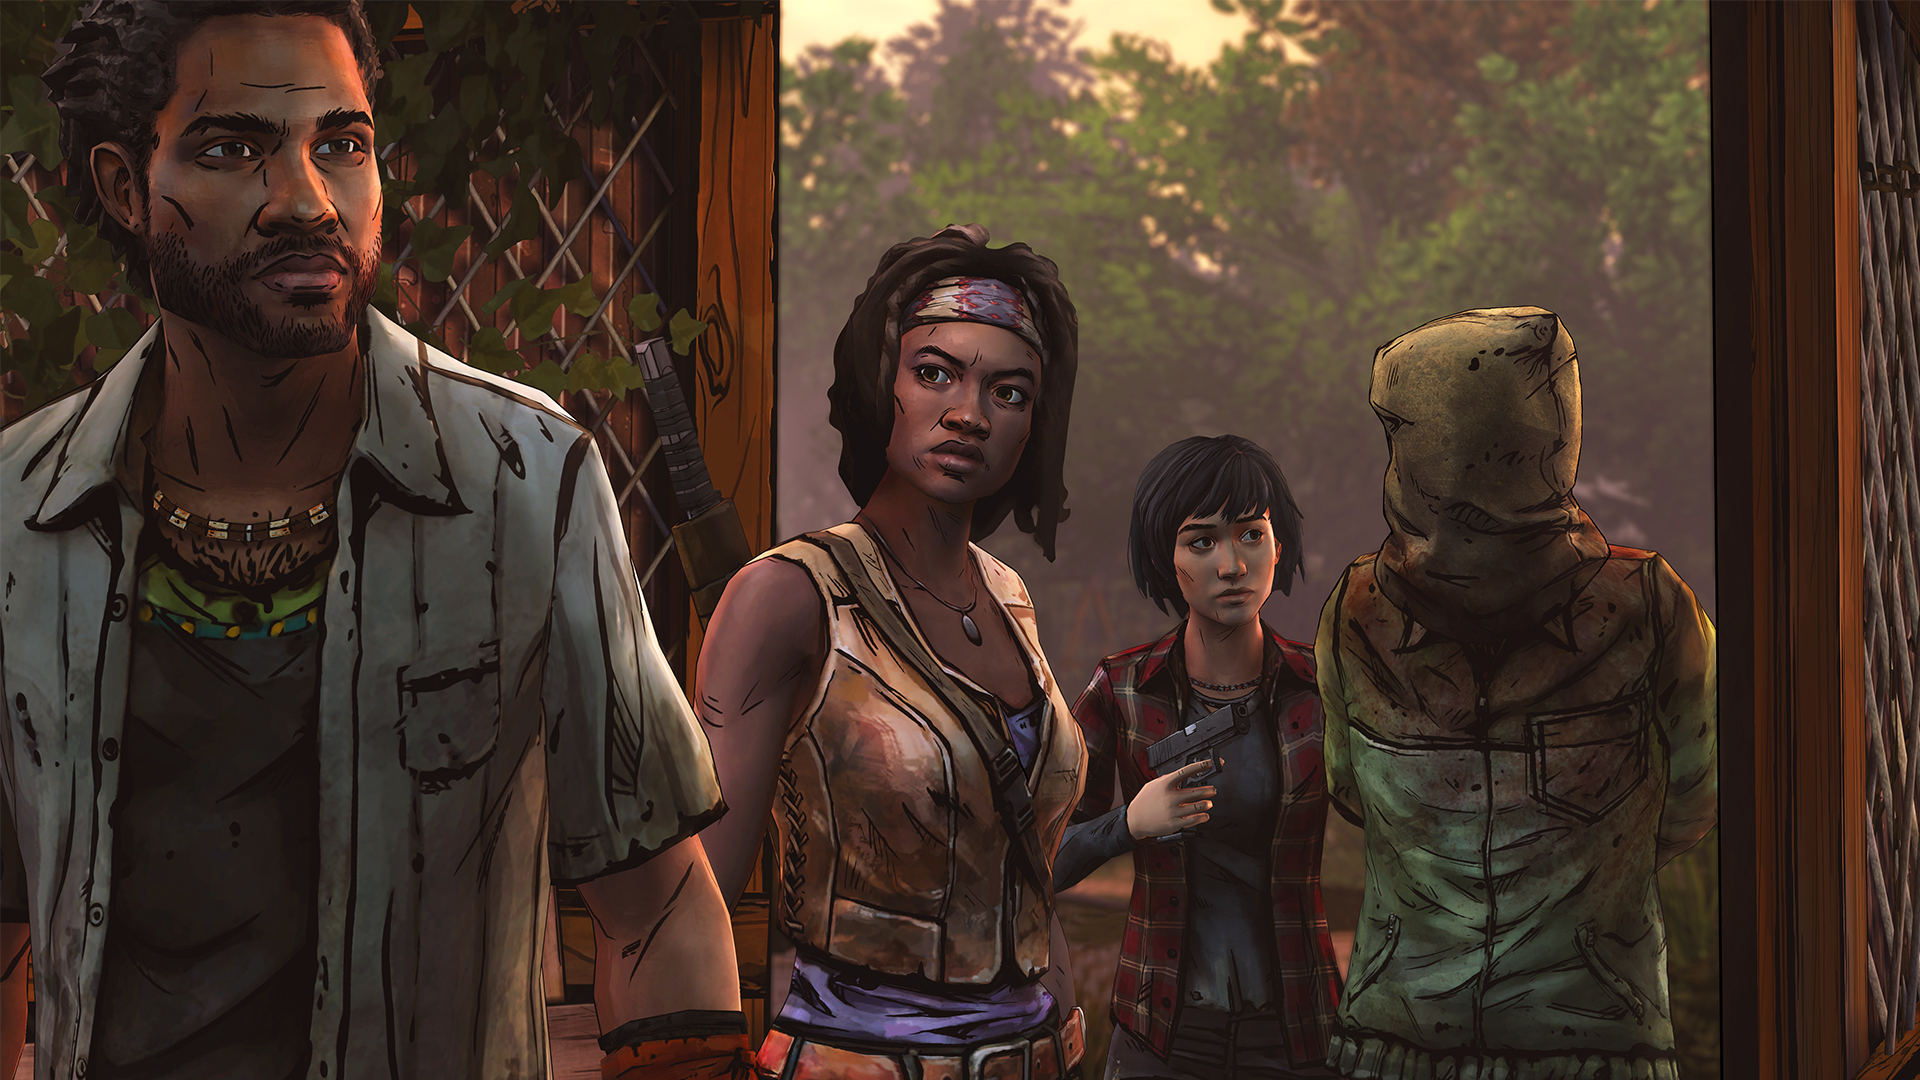 last-episode-of-the-walking-dead-michonne-revealed-player-theory